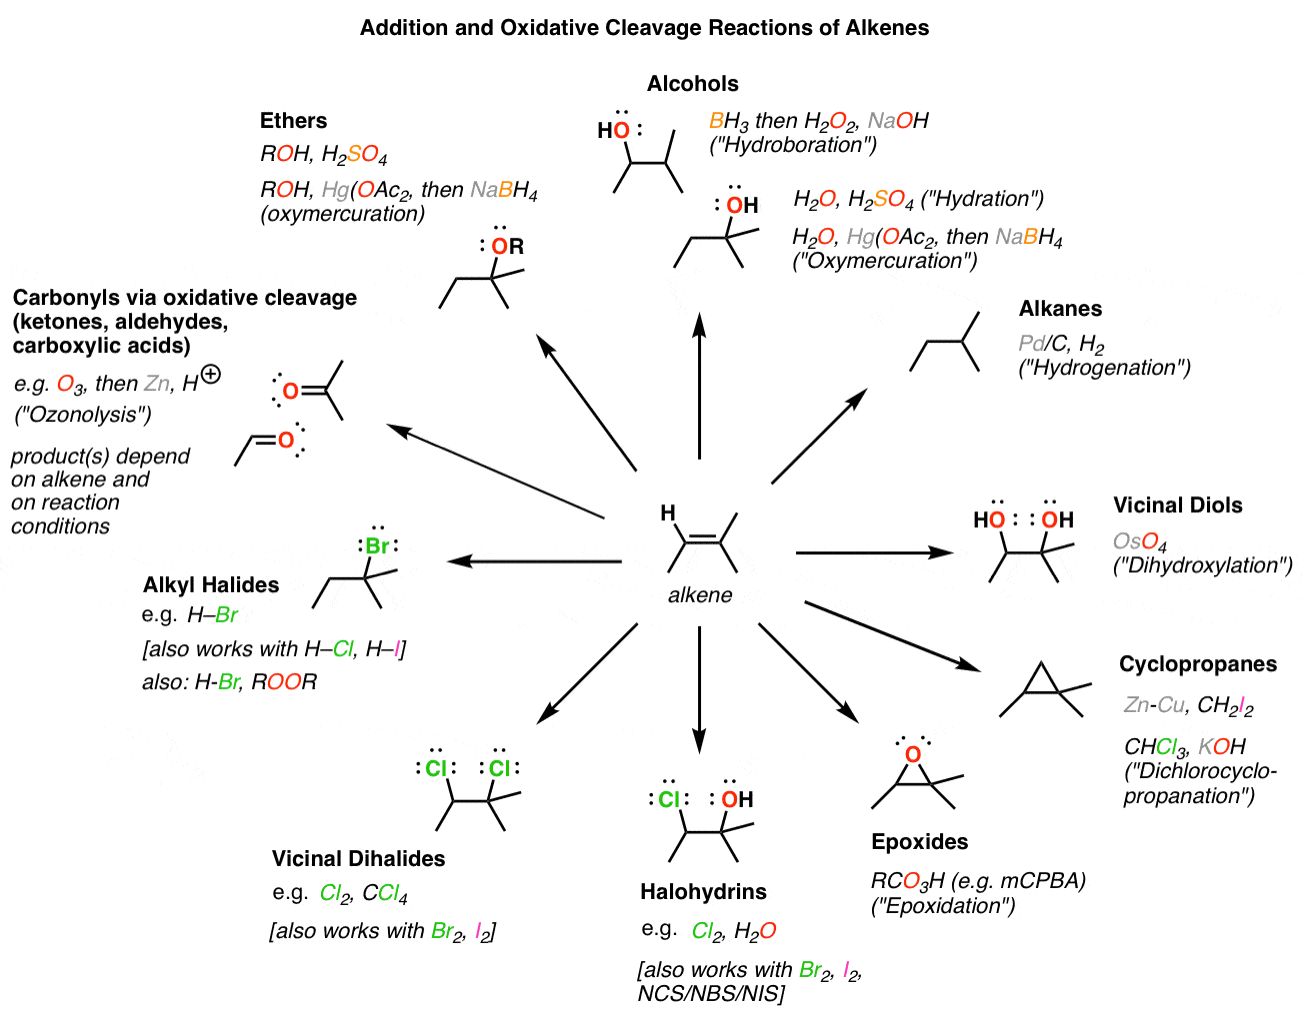 map of alkene reactions addition and oxidative cleavage reactions giving various products examples